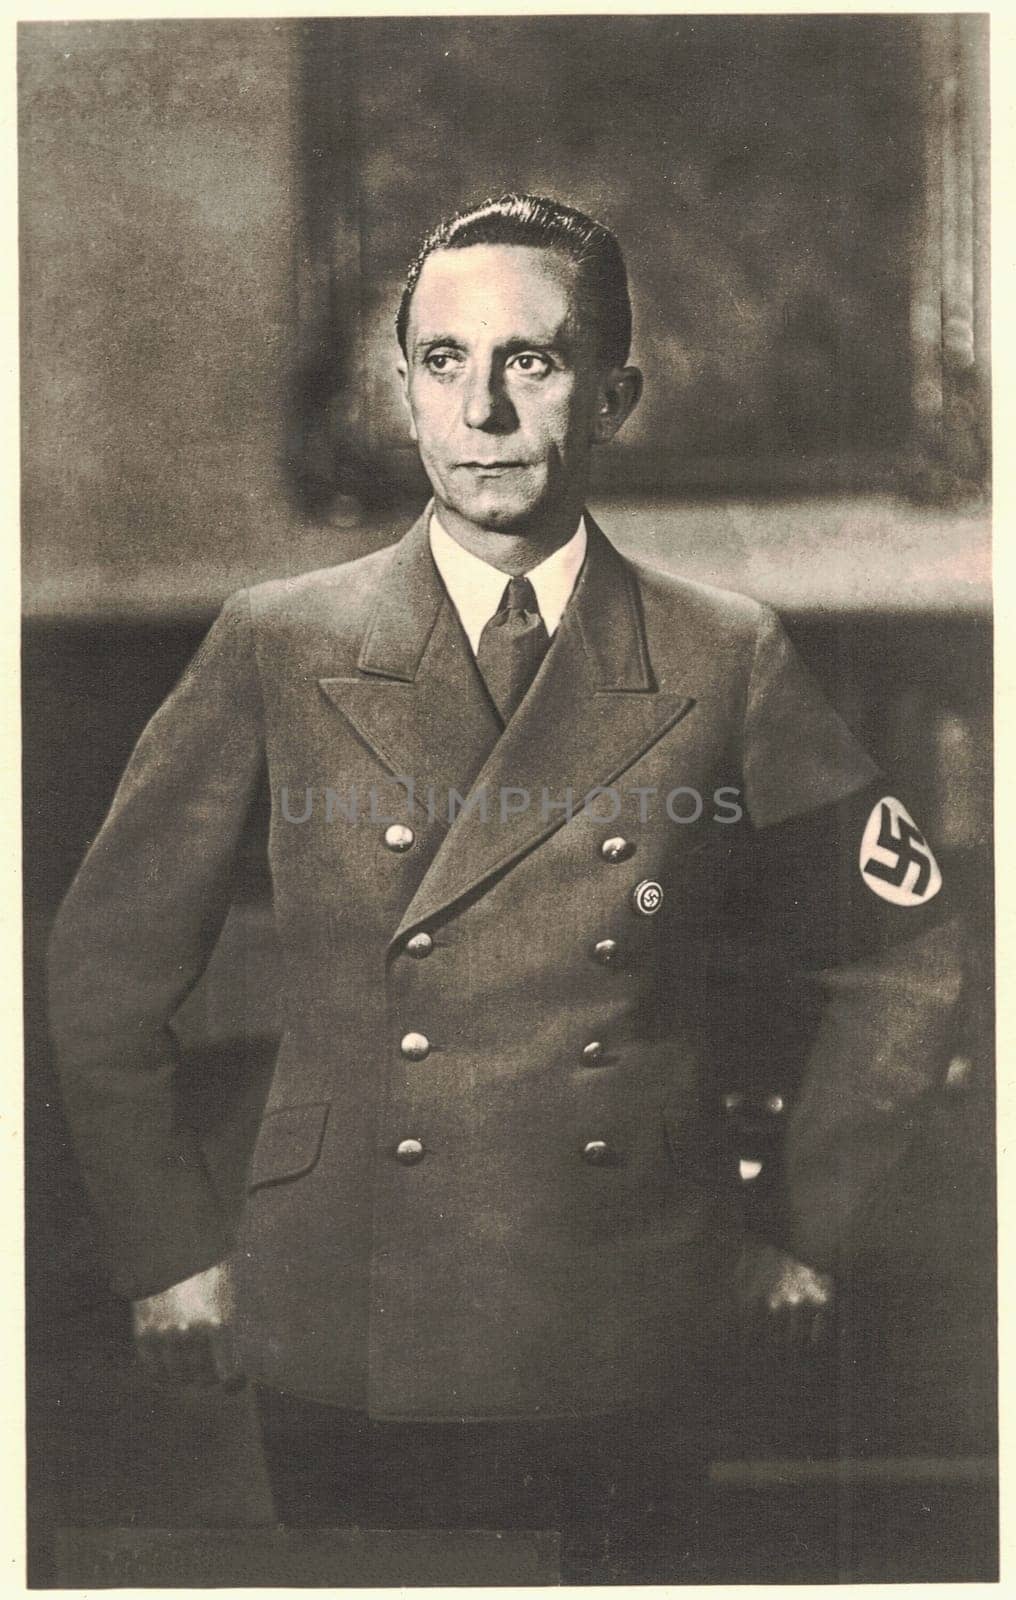 Paul Joseph Goebbels, 29 October 1897-1 May 1945 was a German Nazi politician and Reich Minister of Propaganda of Nazi Germany from 1933 to 1945. He was one of Adolf Hitler's closest and most devoted associates, and was known for his skills in public speaking and his deeply virulent antisemitism. by roman_nerud